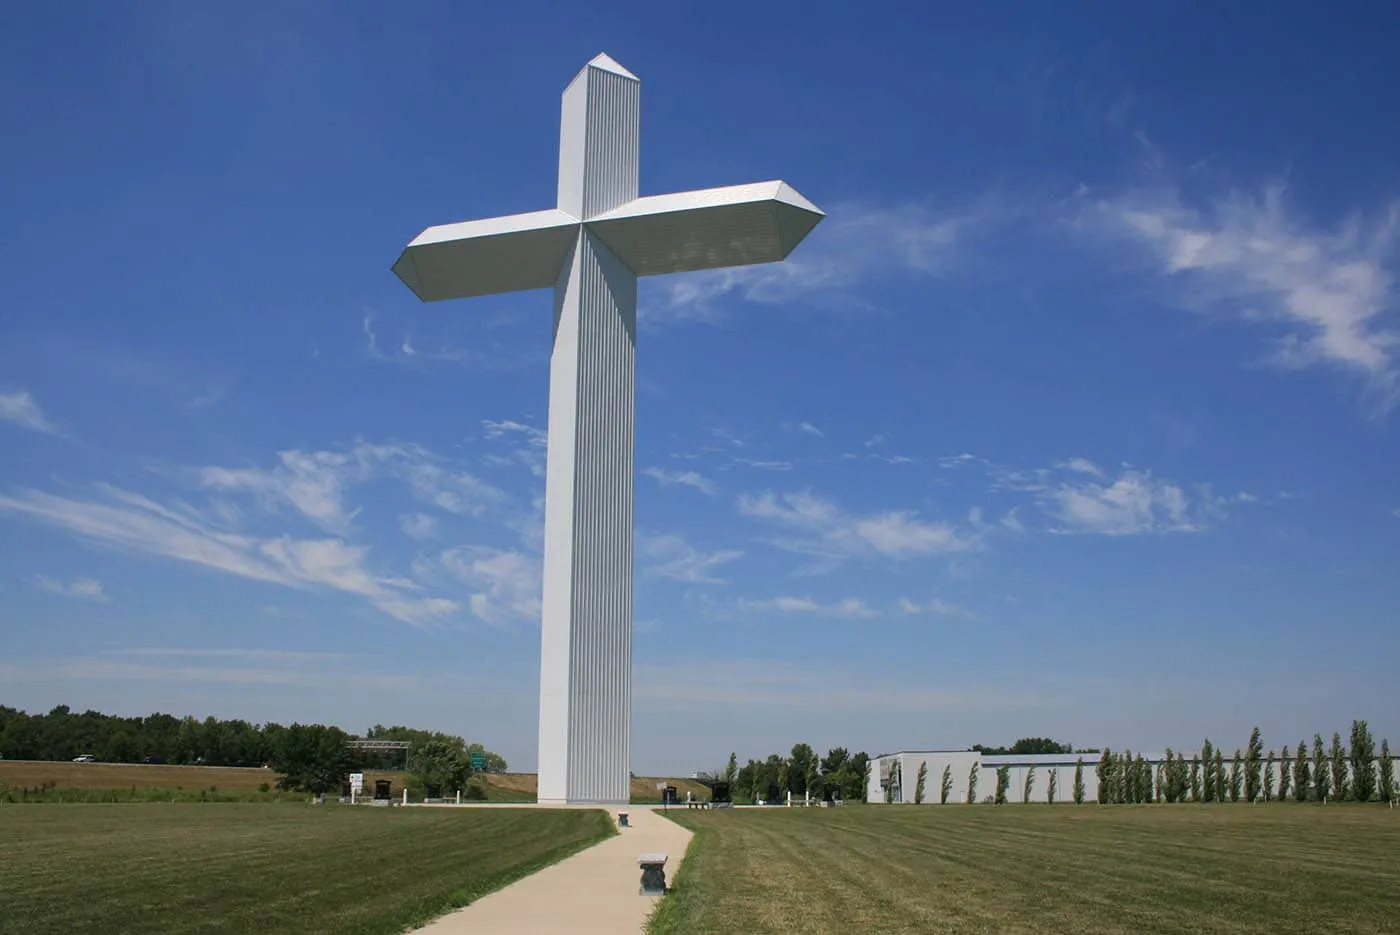 Best Illinois roadside attractions: Cross at the Crossroads - The World's Largest Cross in Effingham, Illinois. Visit this roadside attraction on an Illinois road trip with kids or weekend getaway with friends. Add the Cross at the Crossroads  to your road trip bucket list and visit them on your next travel adventure.